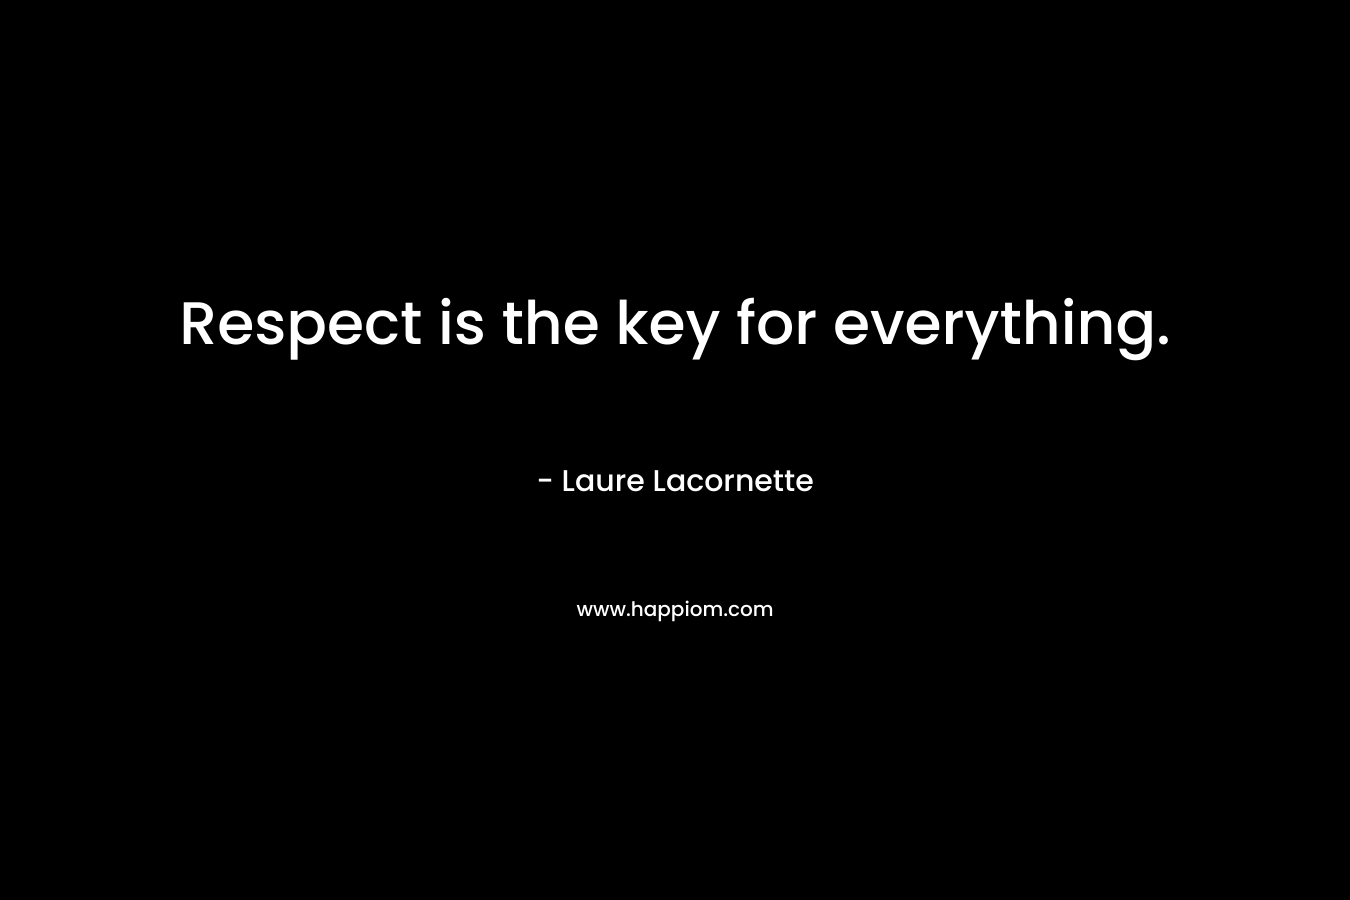 Respect is the key for everything. – Laure Lacornette